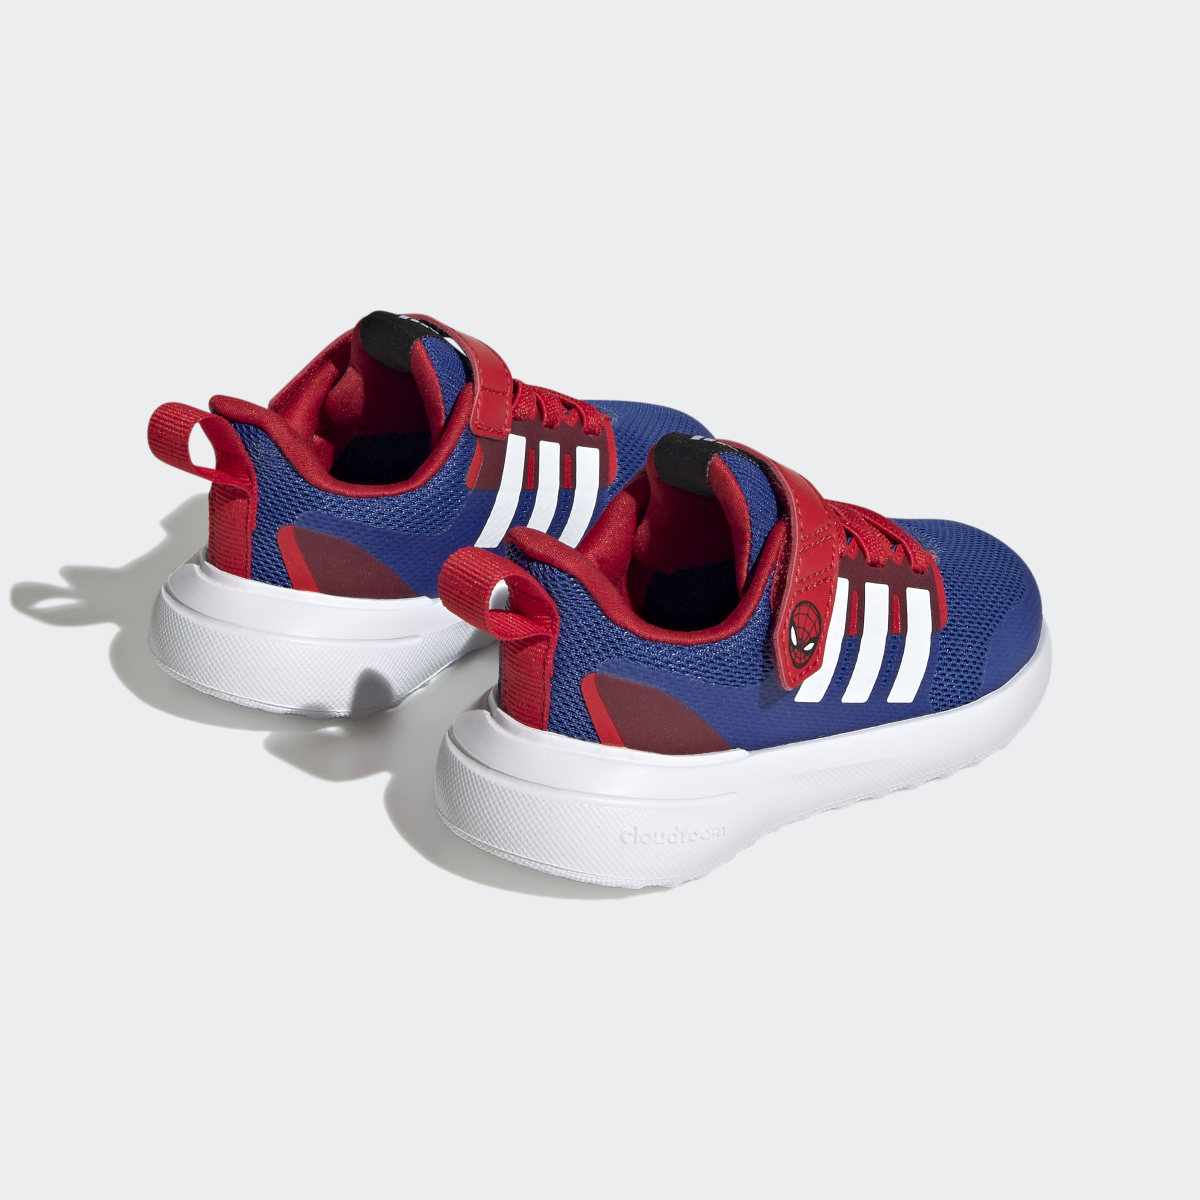 Adidas x Marvel FortaRun 2.0 Spider-Man Cloudfoam Sport Running Elastic Lace Top Strap Shoes. 6